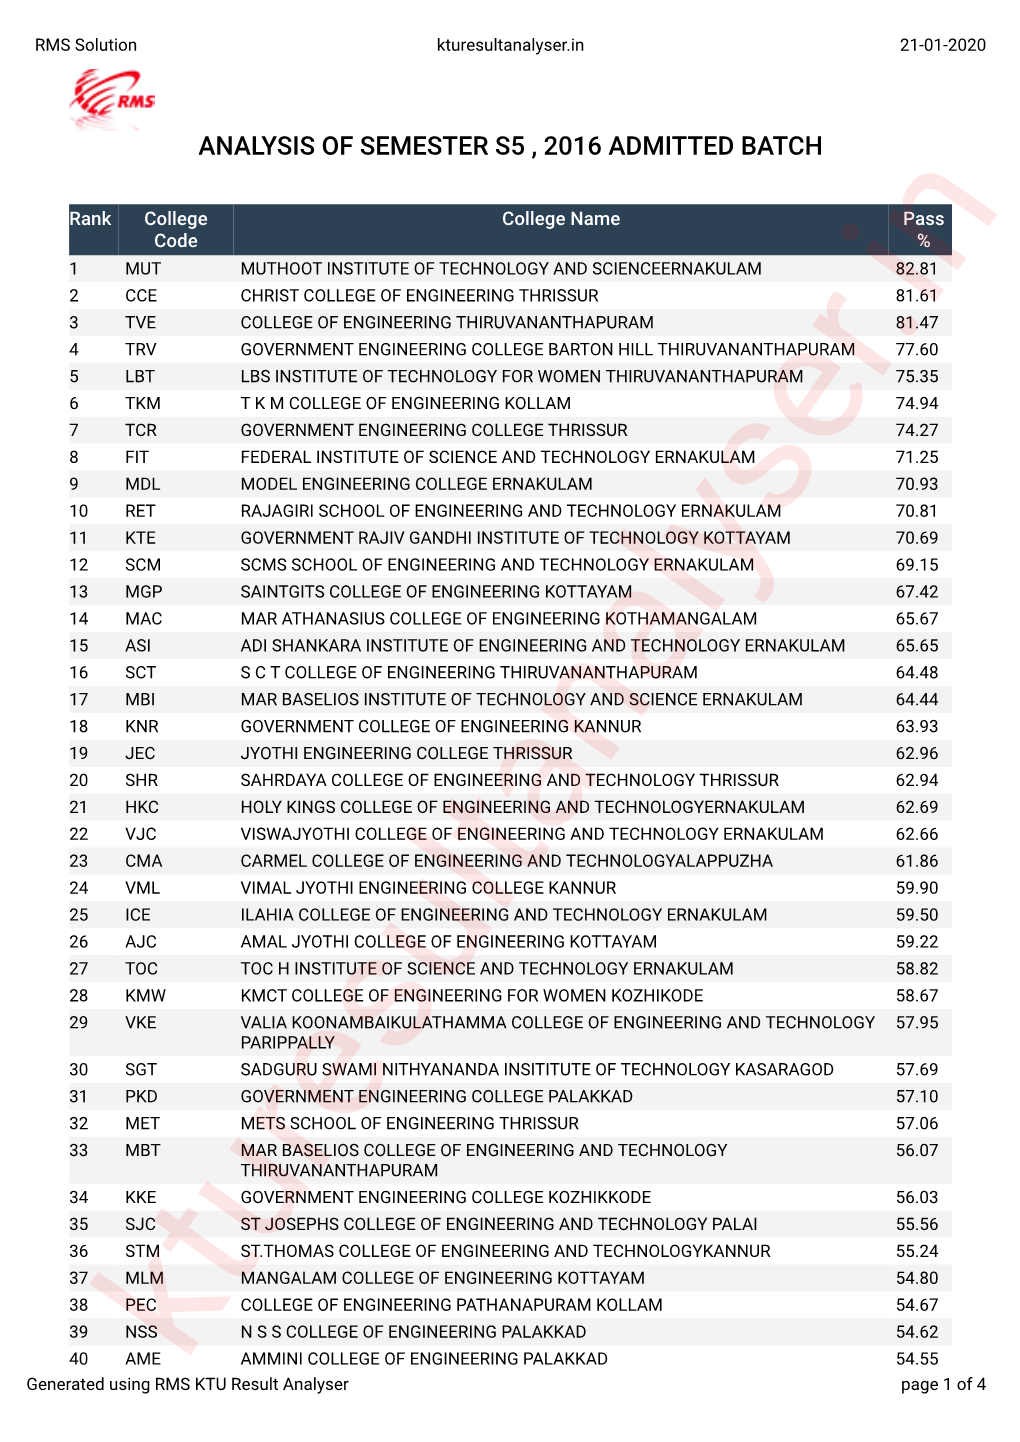 Analysis of Semester S5 , 2016 Admitted Batch